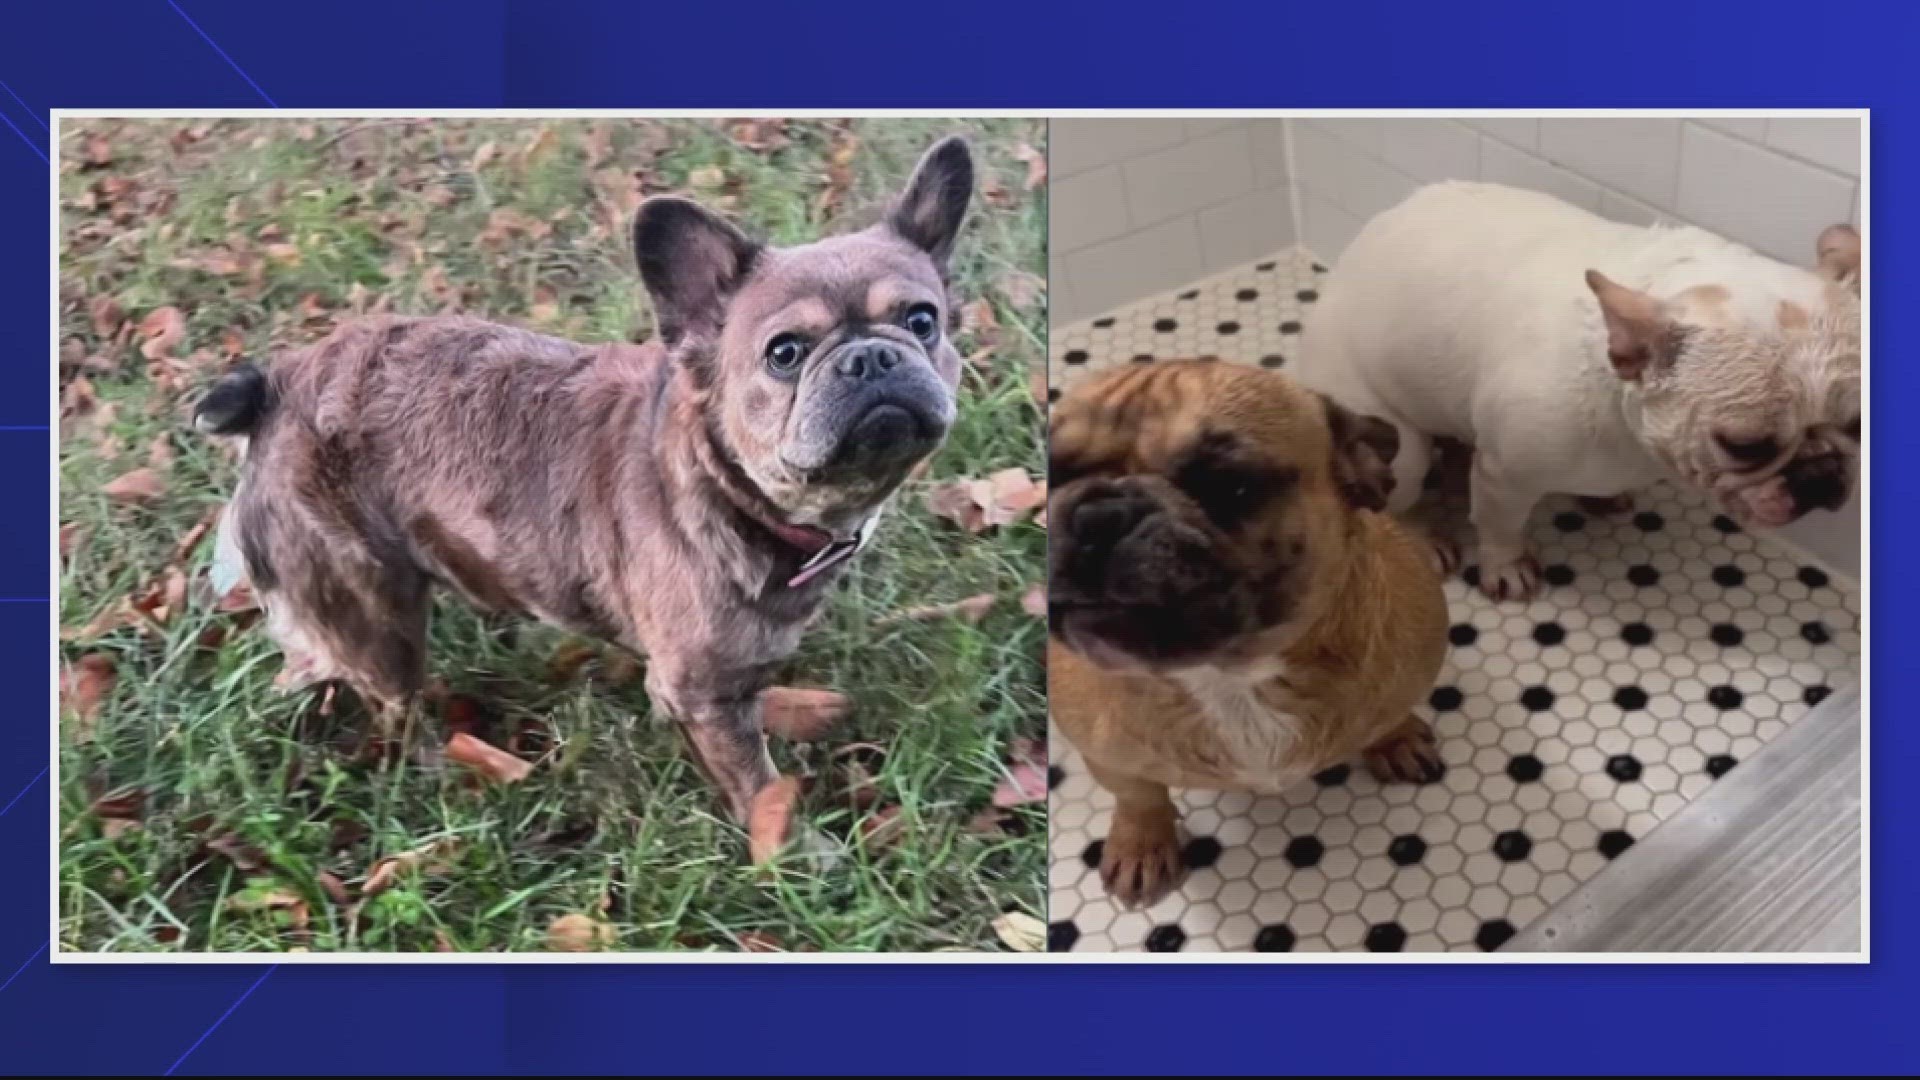 Police are seeking the public’s assistance in identifying three suspects involved in the theft of three French Bulldogs.